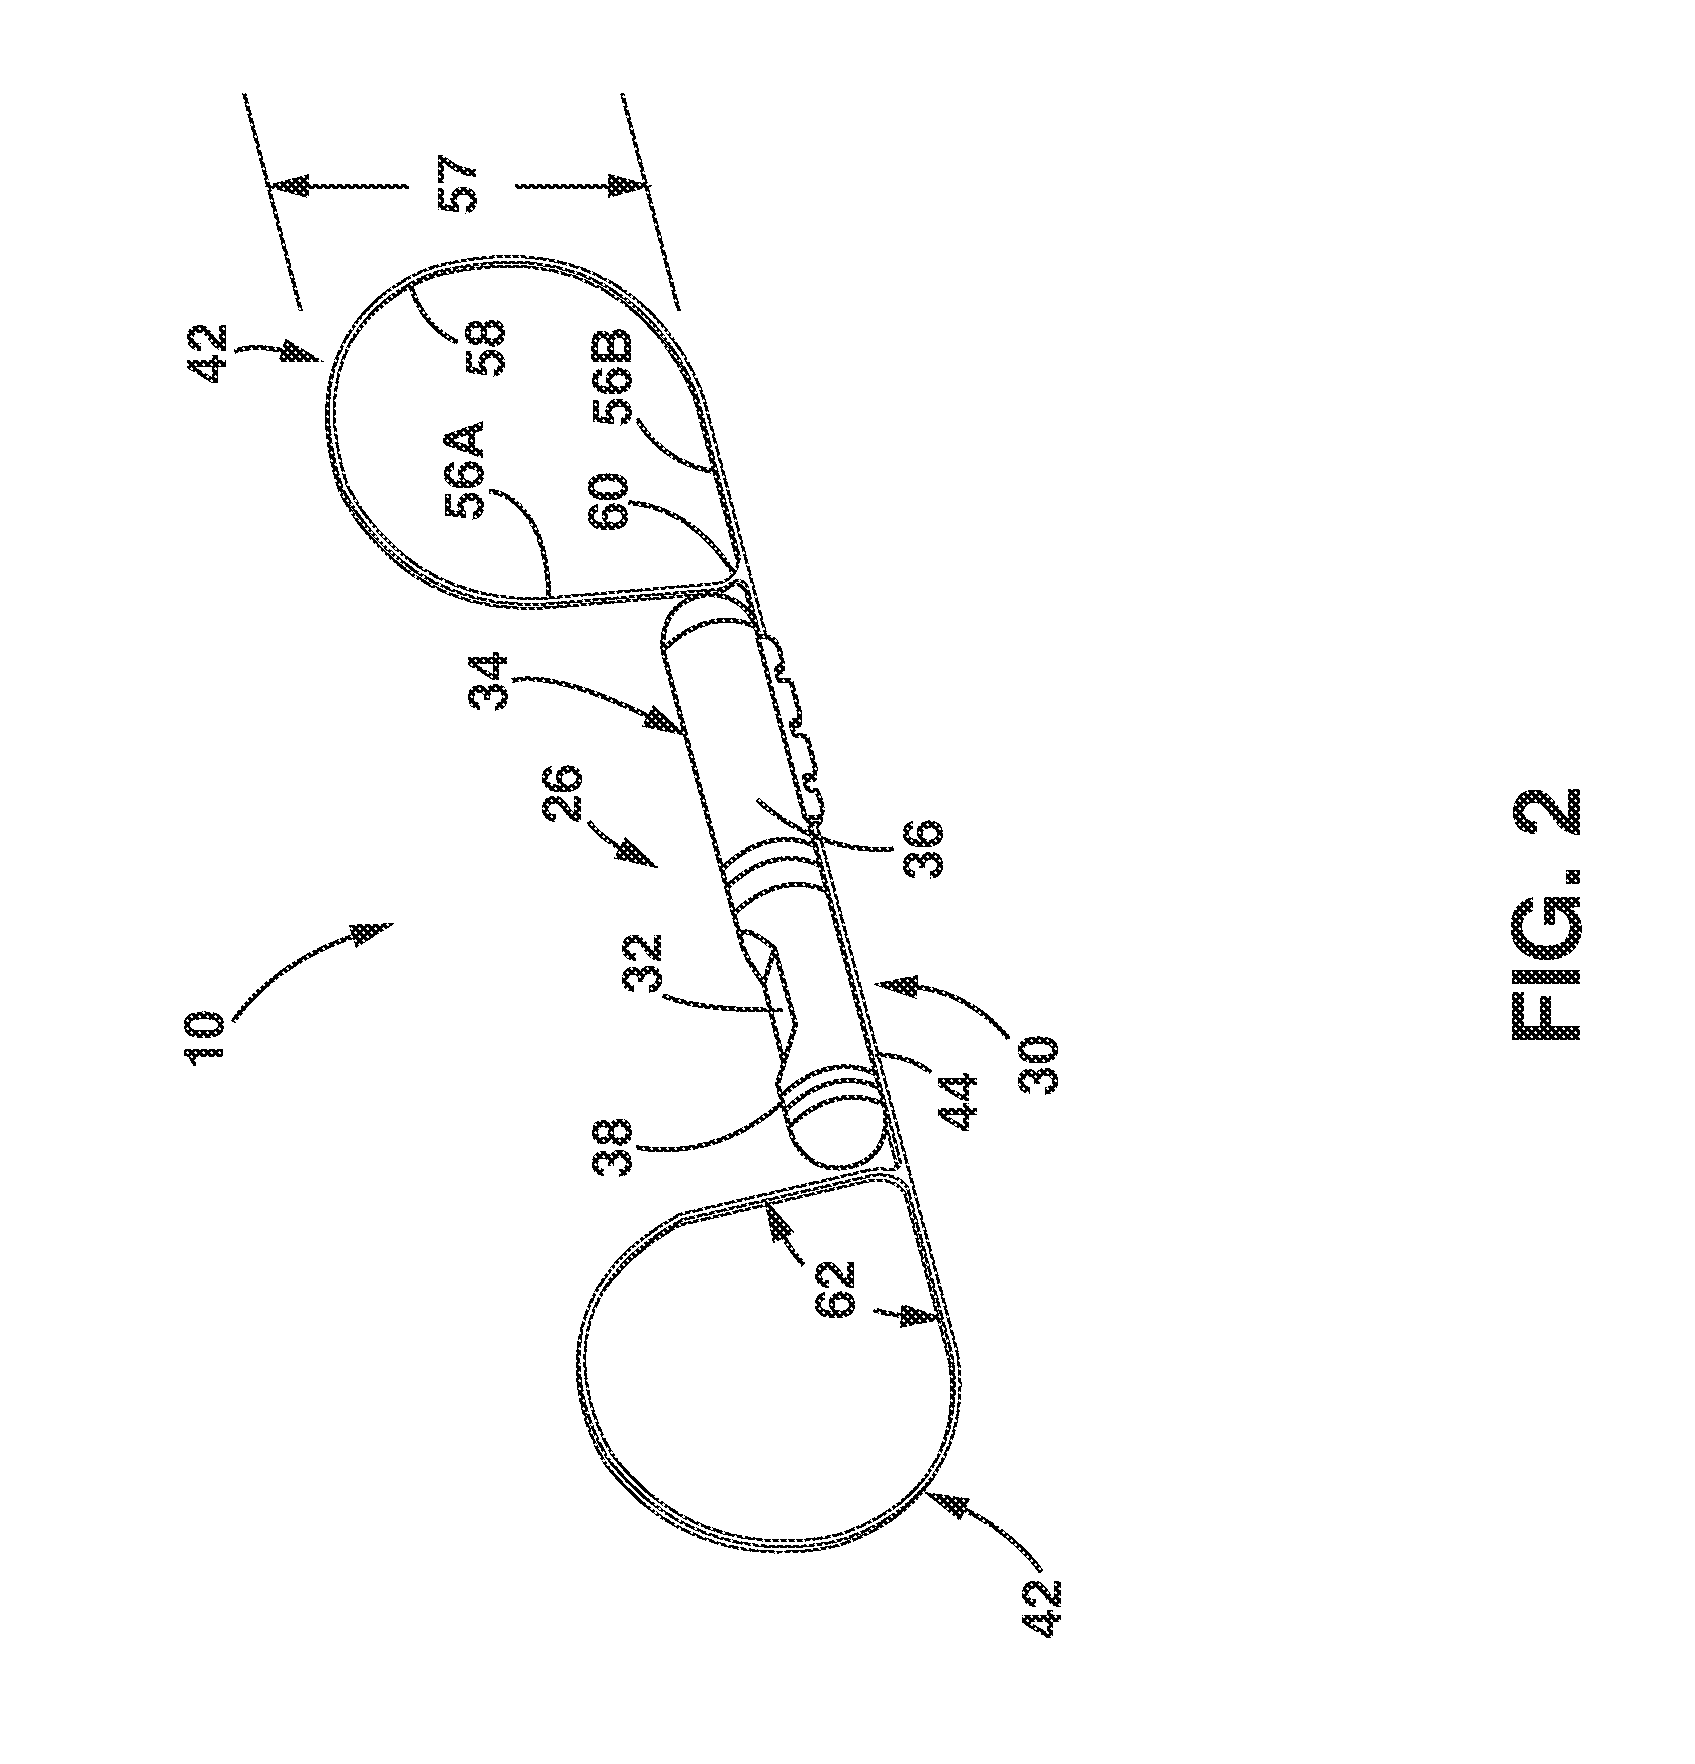 Delivery System for Implantable Medical Device